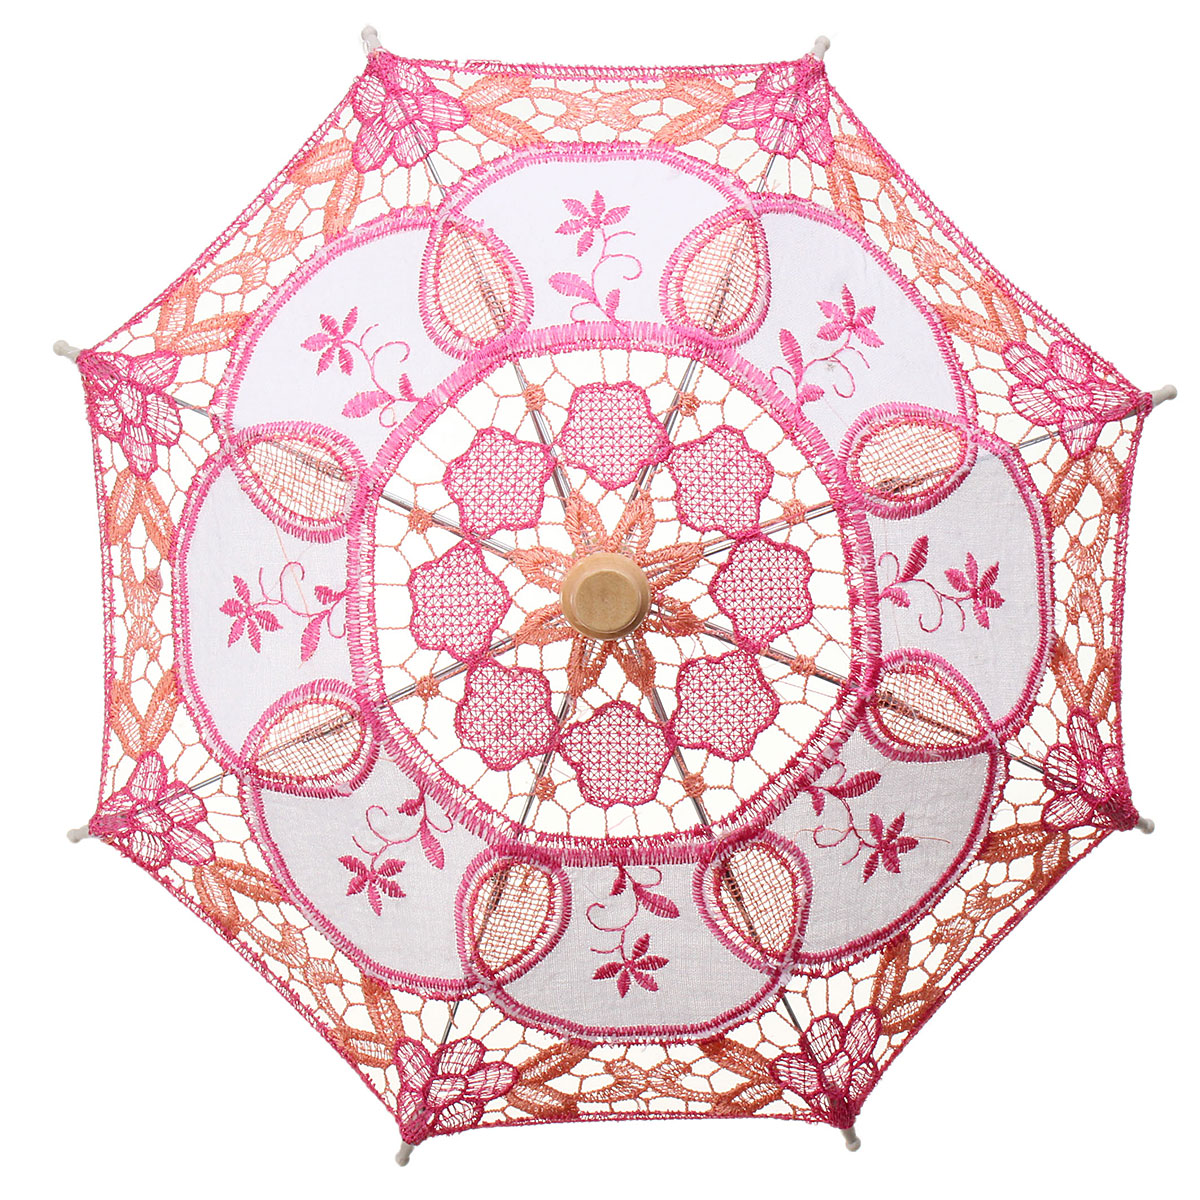 Lace-Embroidered-Umbrella-Elegance-Parasol-For-Party-Bridal-Wedding-Decoration-1050530-8